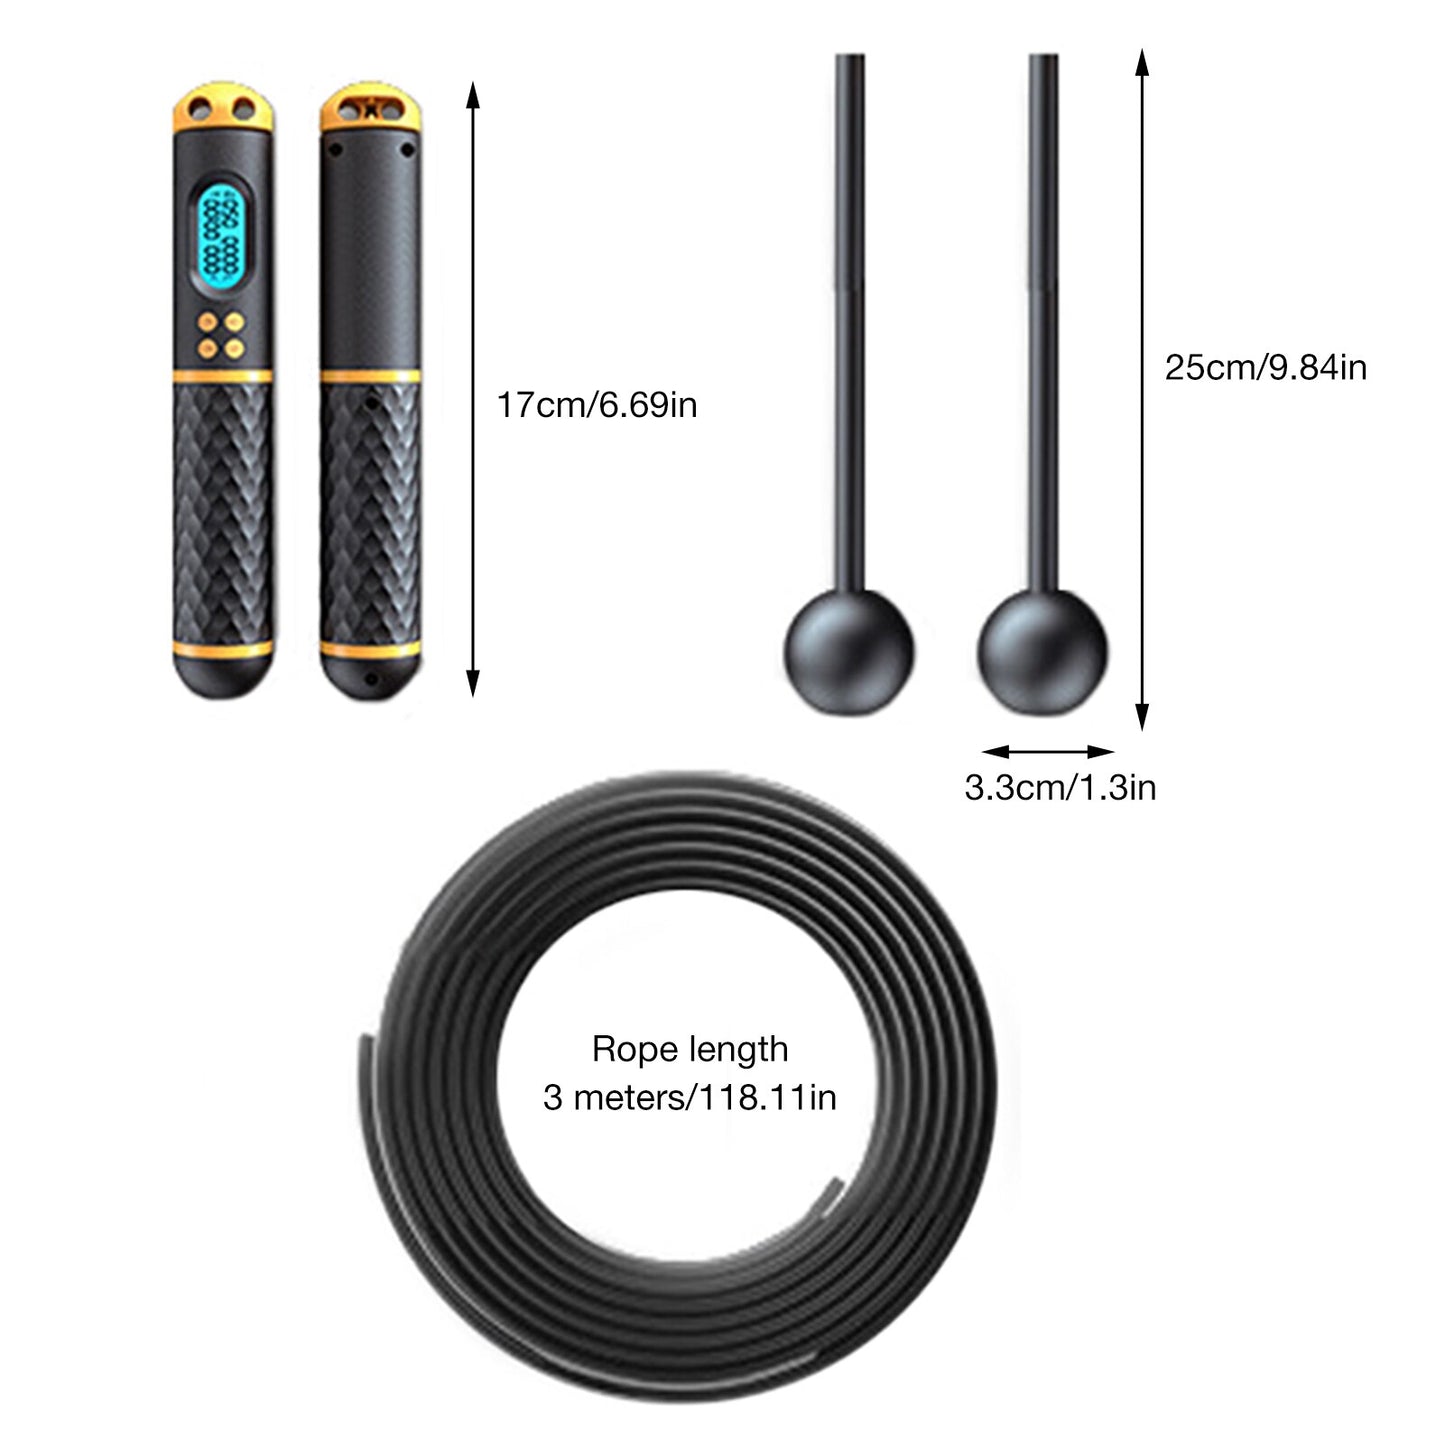 2-In-1 Jump Rope Intelligent Cordless Skipping Rope Digital Counter Gym Rope Weight Loss Training Speed Rope for Fitness Workout